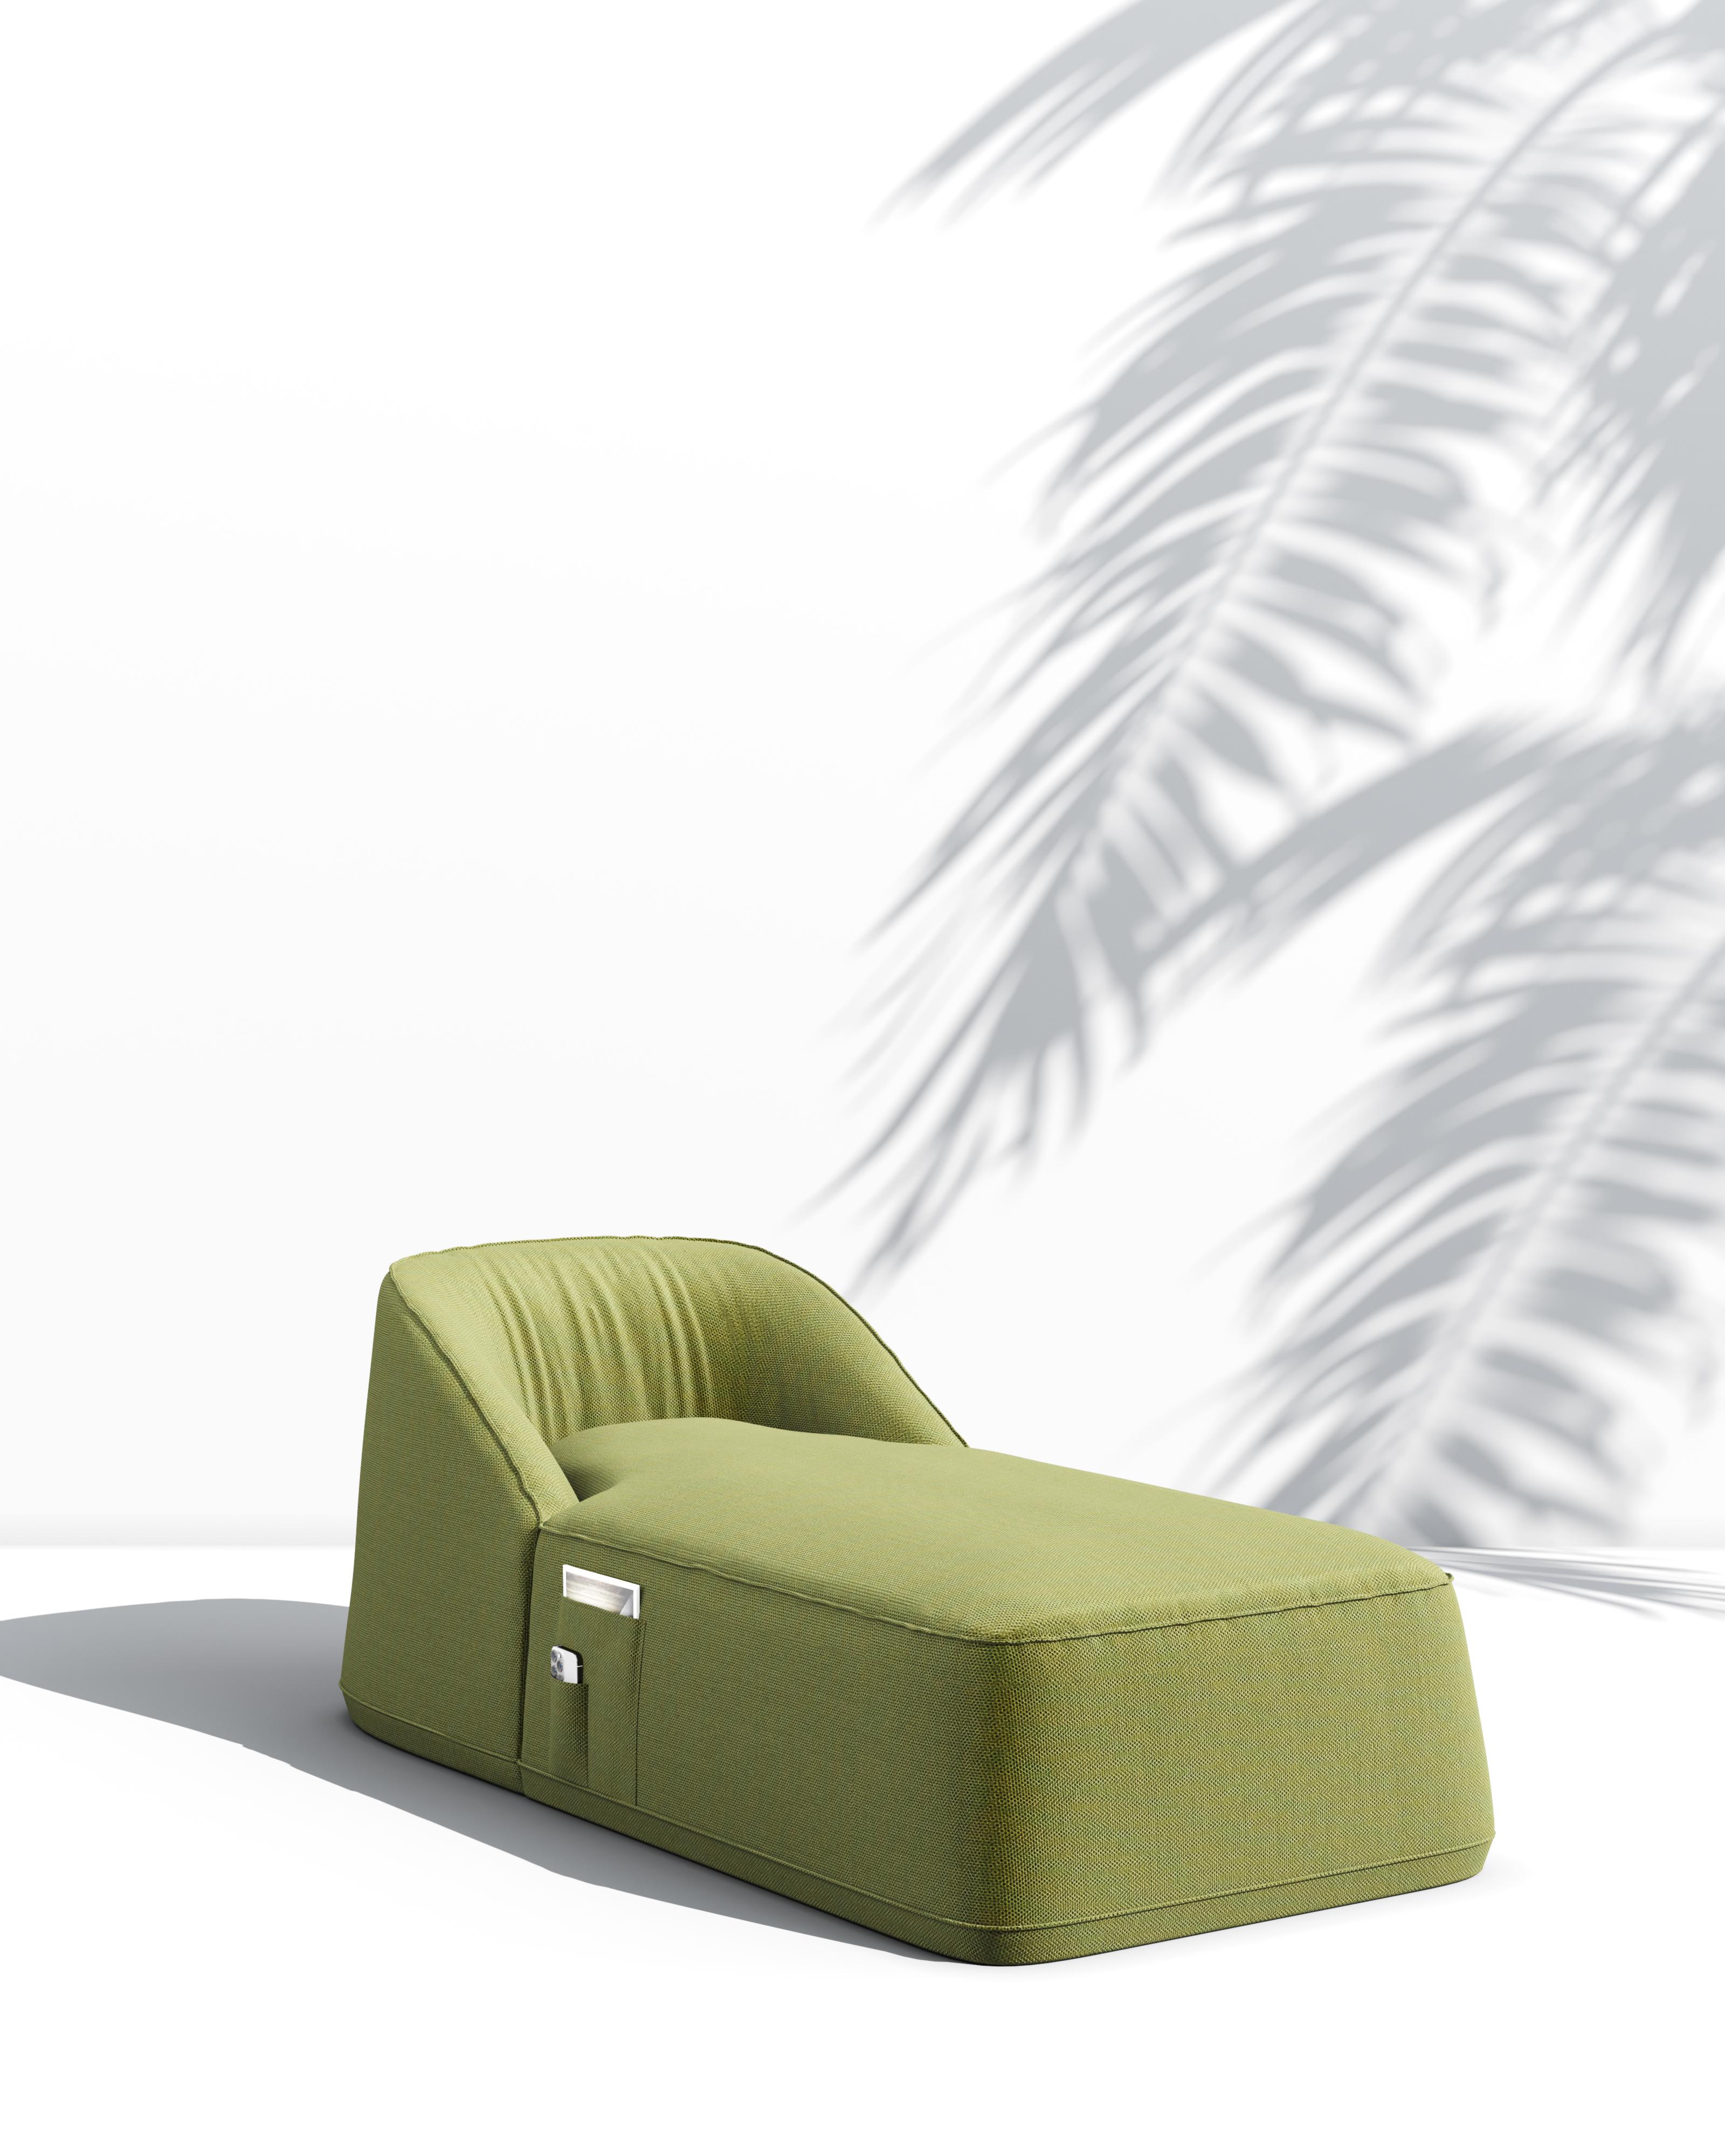 Contemporary Modern Outdoor Sunbed Weather-Resistant Sunbrella Fabric Upholstery in Green For Sale